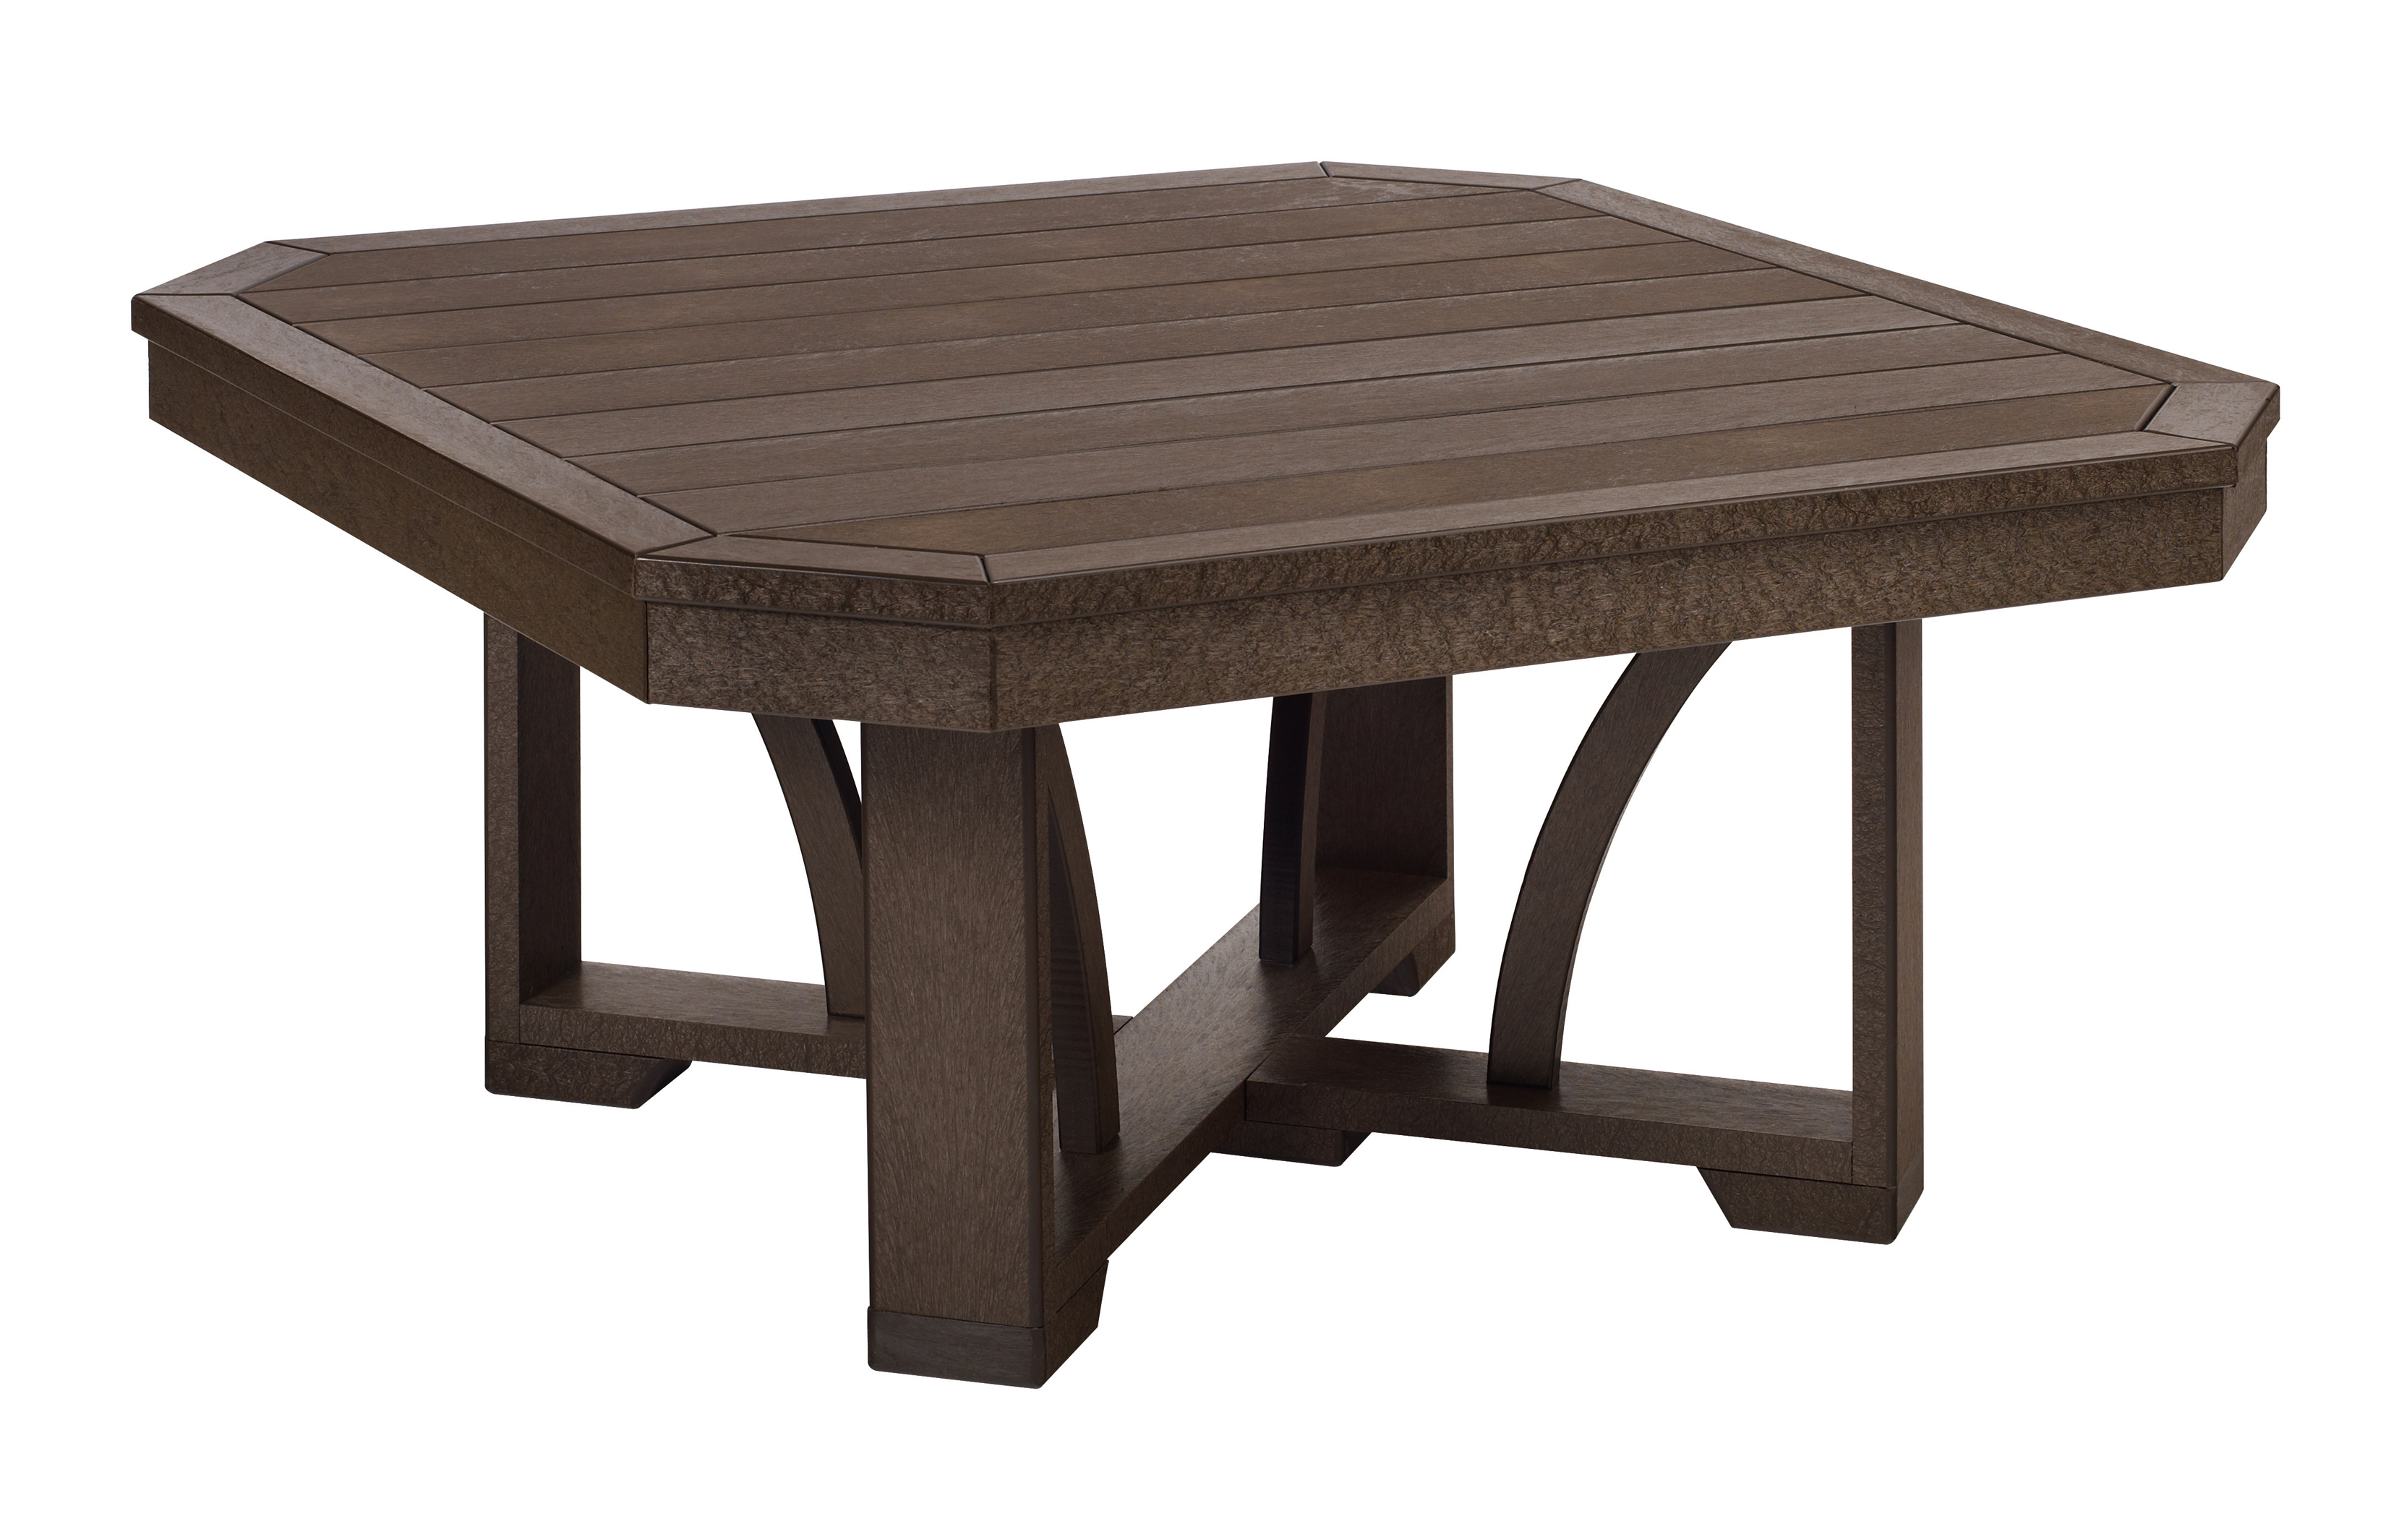 T30 Square Square Table  35" - chocolate 16 